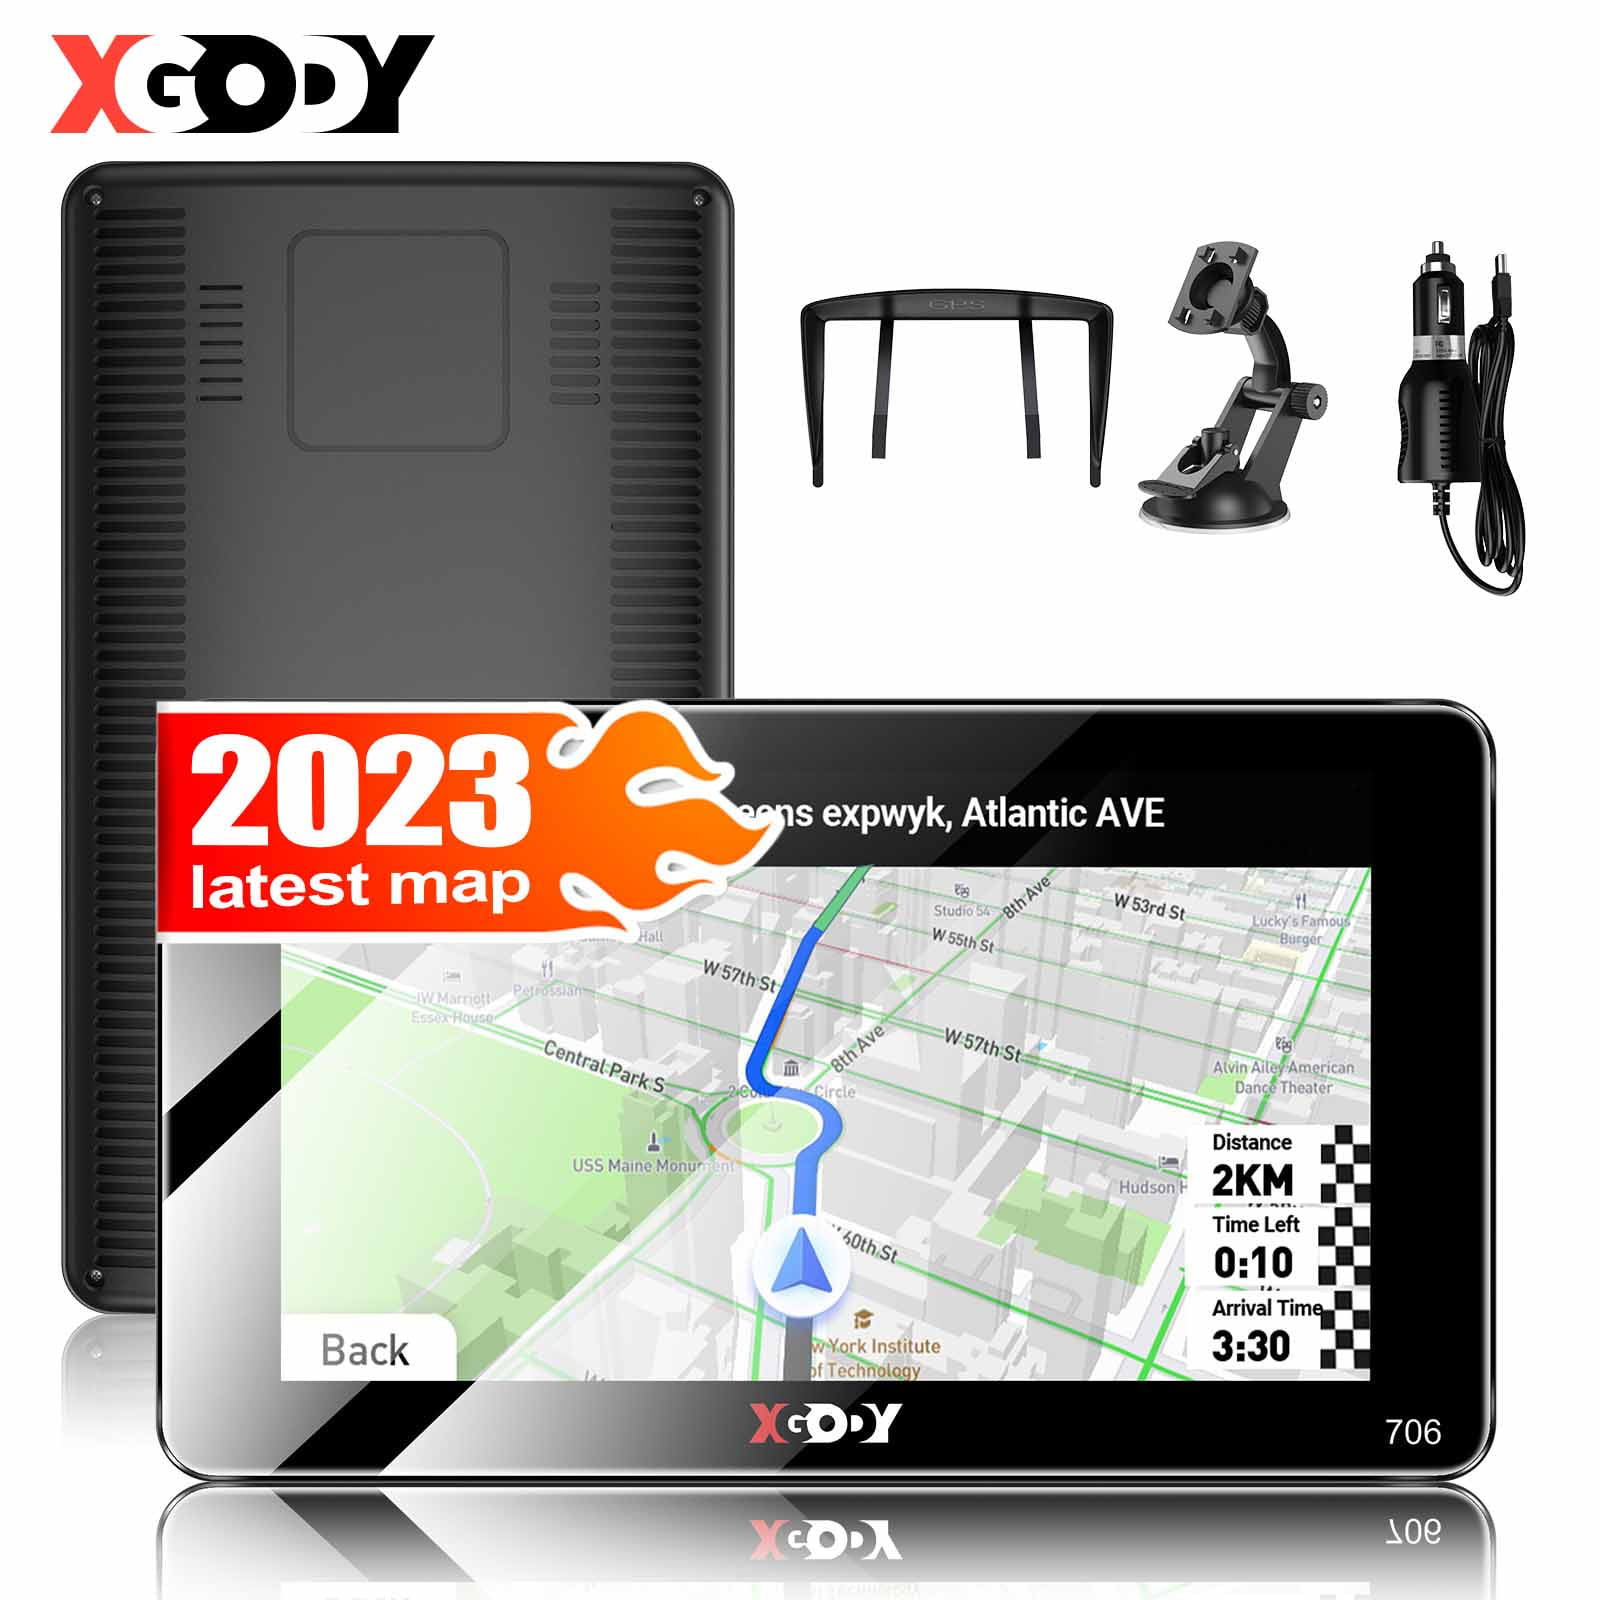 melodramatiske Diskutere lilla XGODY 2.5D Screen GPS Navigation for car 7 inch 2023 maps car GPS for car  Truck GPS Commercial Drivers semi Trucker Navigation System 8GB 256M with  Voice Guidance Free Lifetime map Updates -